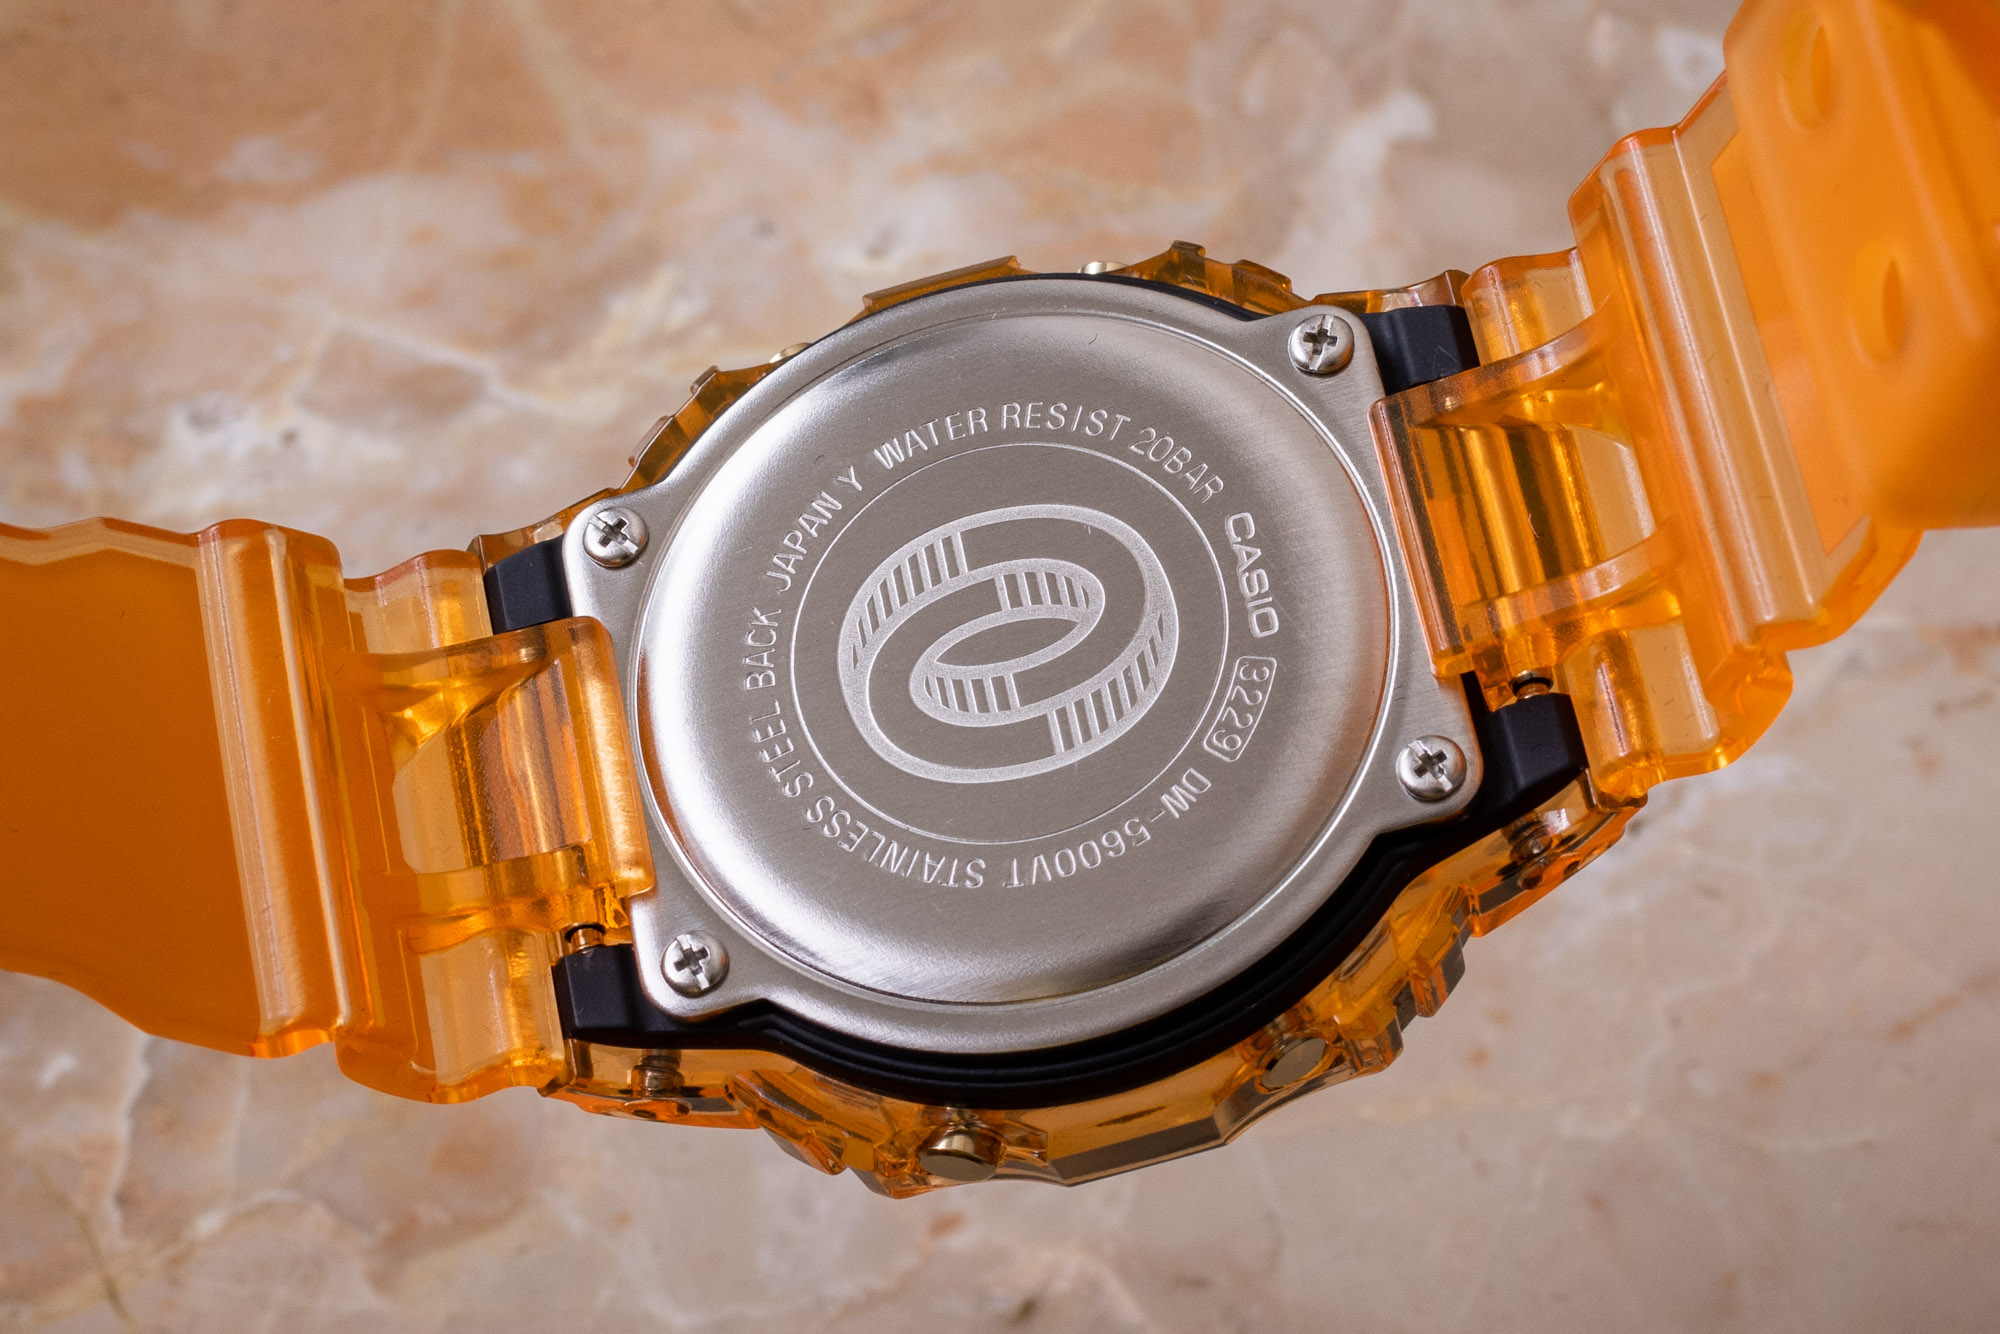 G-SHOCK x Oneness DW-5600 Collaboration Release